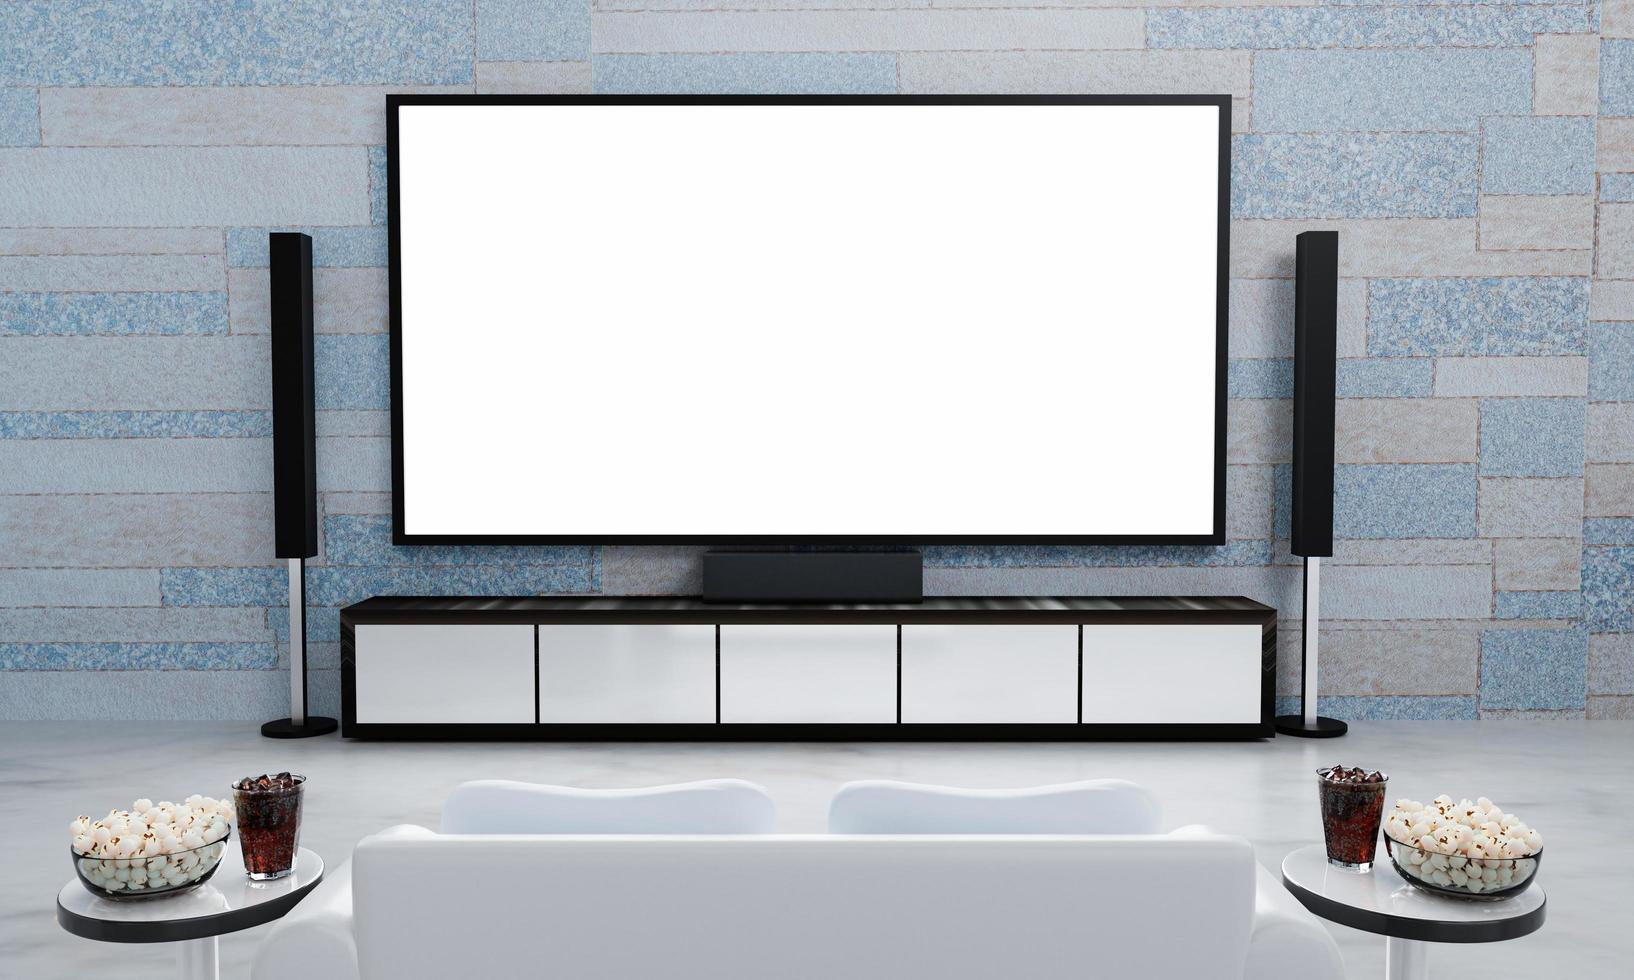 Home Theater brick marble pattern wallpaper without people. Screen TV and  Audio equipment for Mini Home Theater. White sofa bed marble floor. Cola and ice cube clear glass with popcorn. 3D Rendering. photo